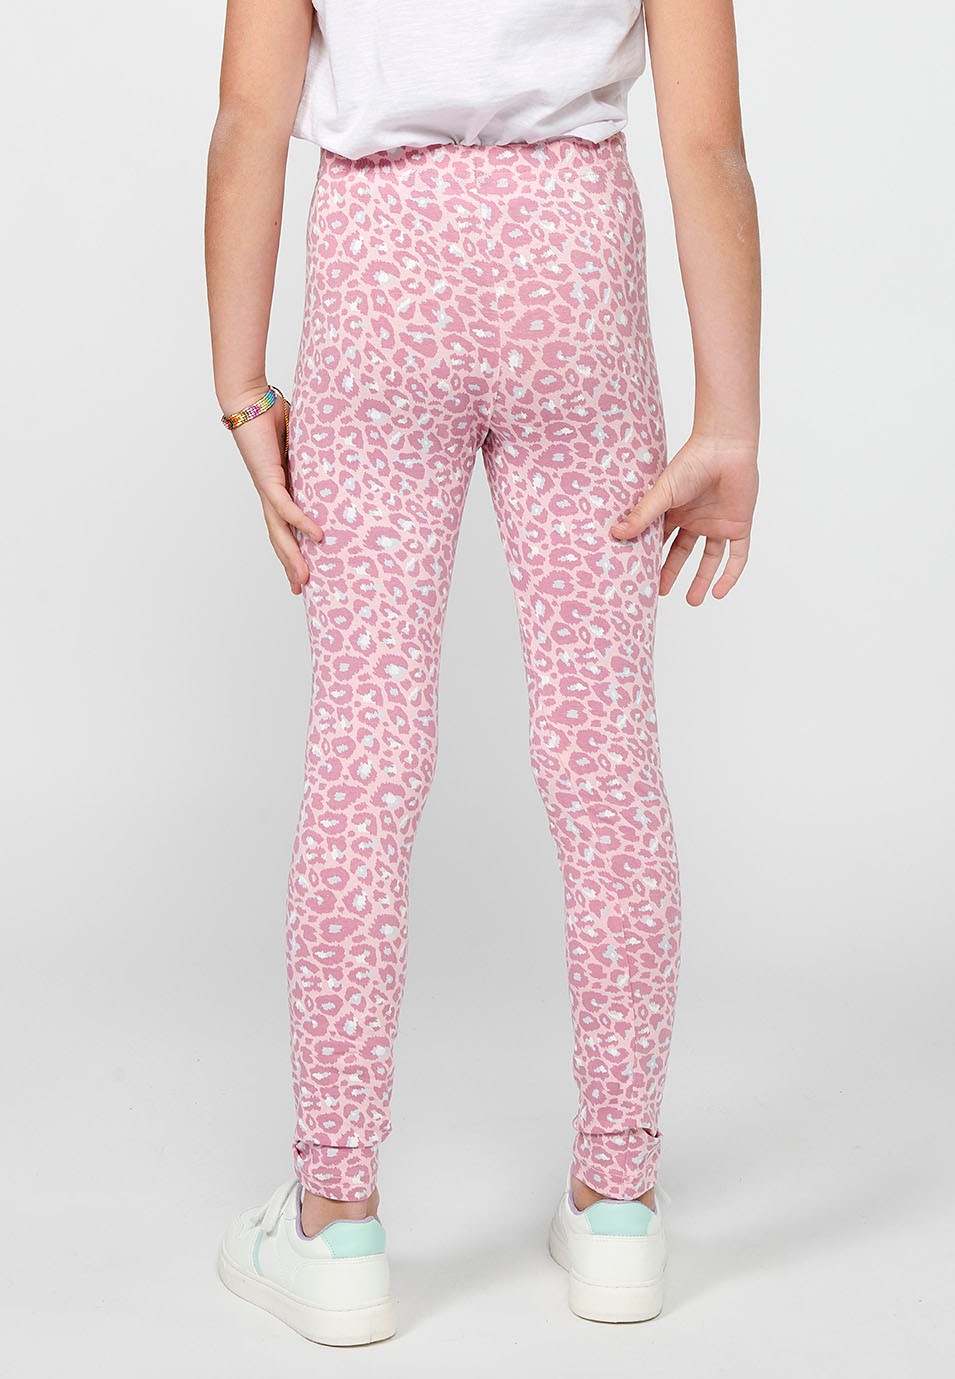 Pack of two long leggings, one of them with an animal print and elastic waistband in Multicolor for Girls 5